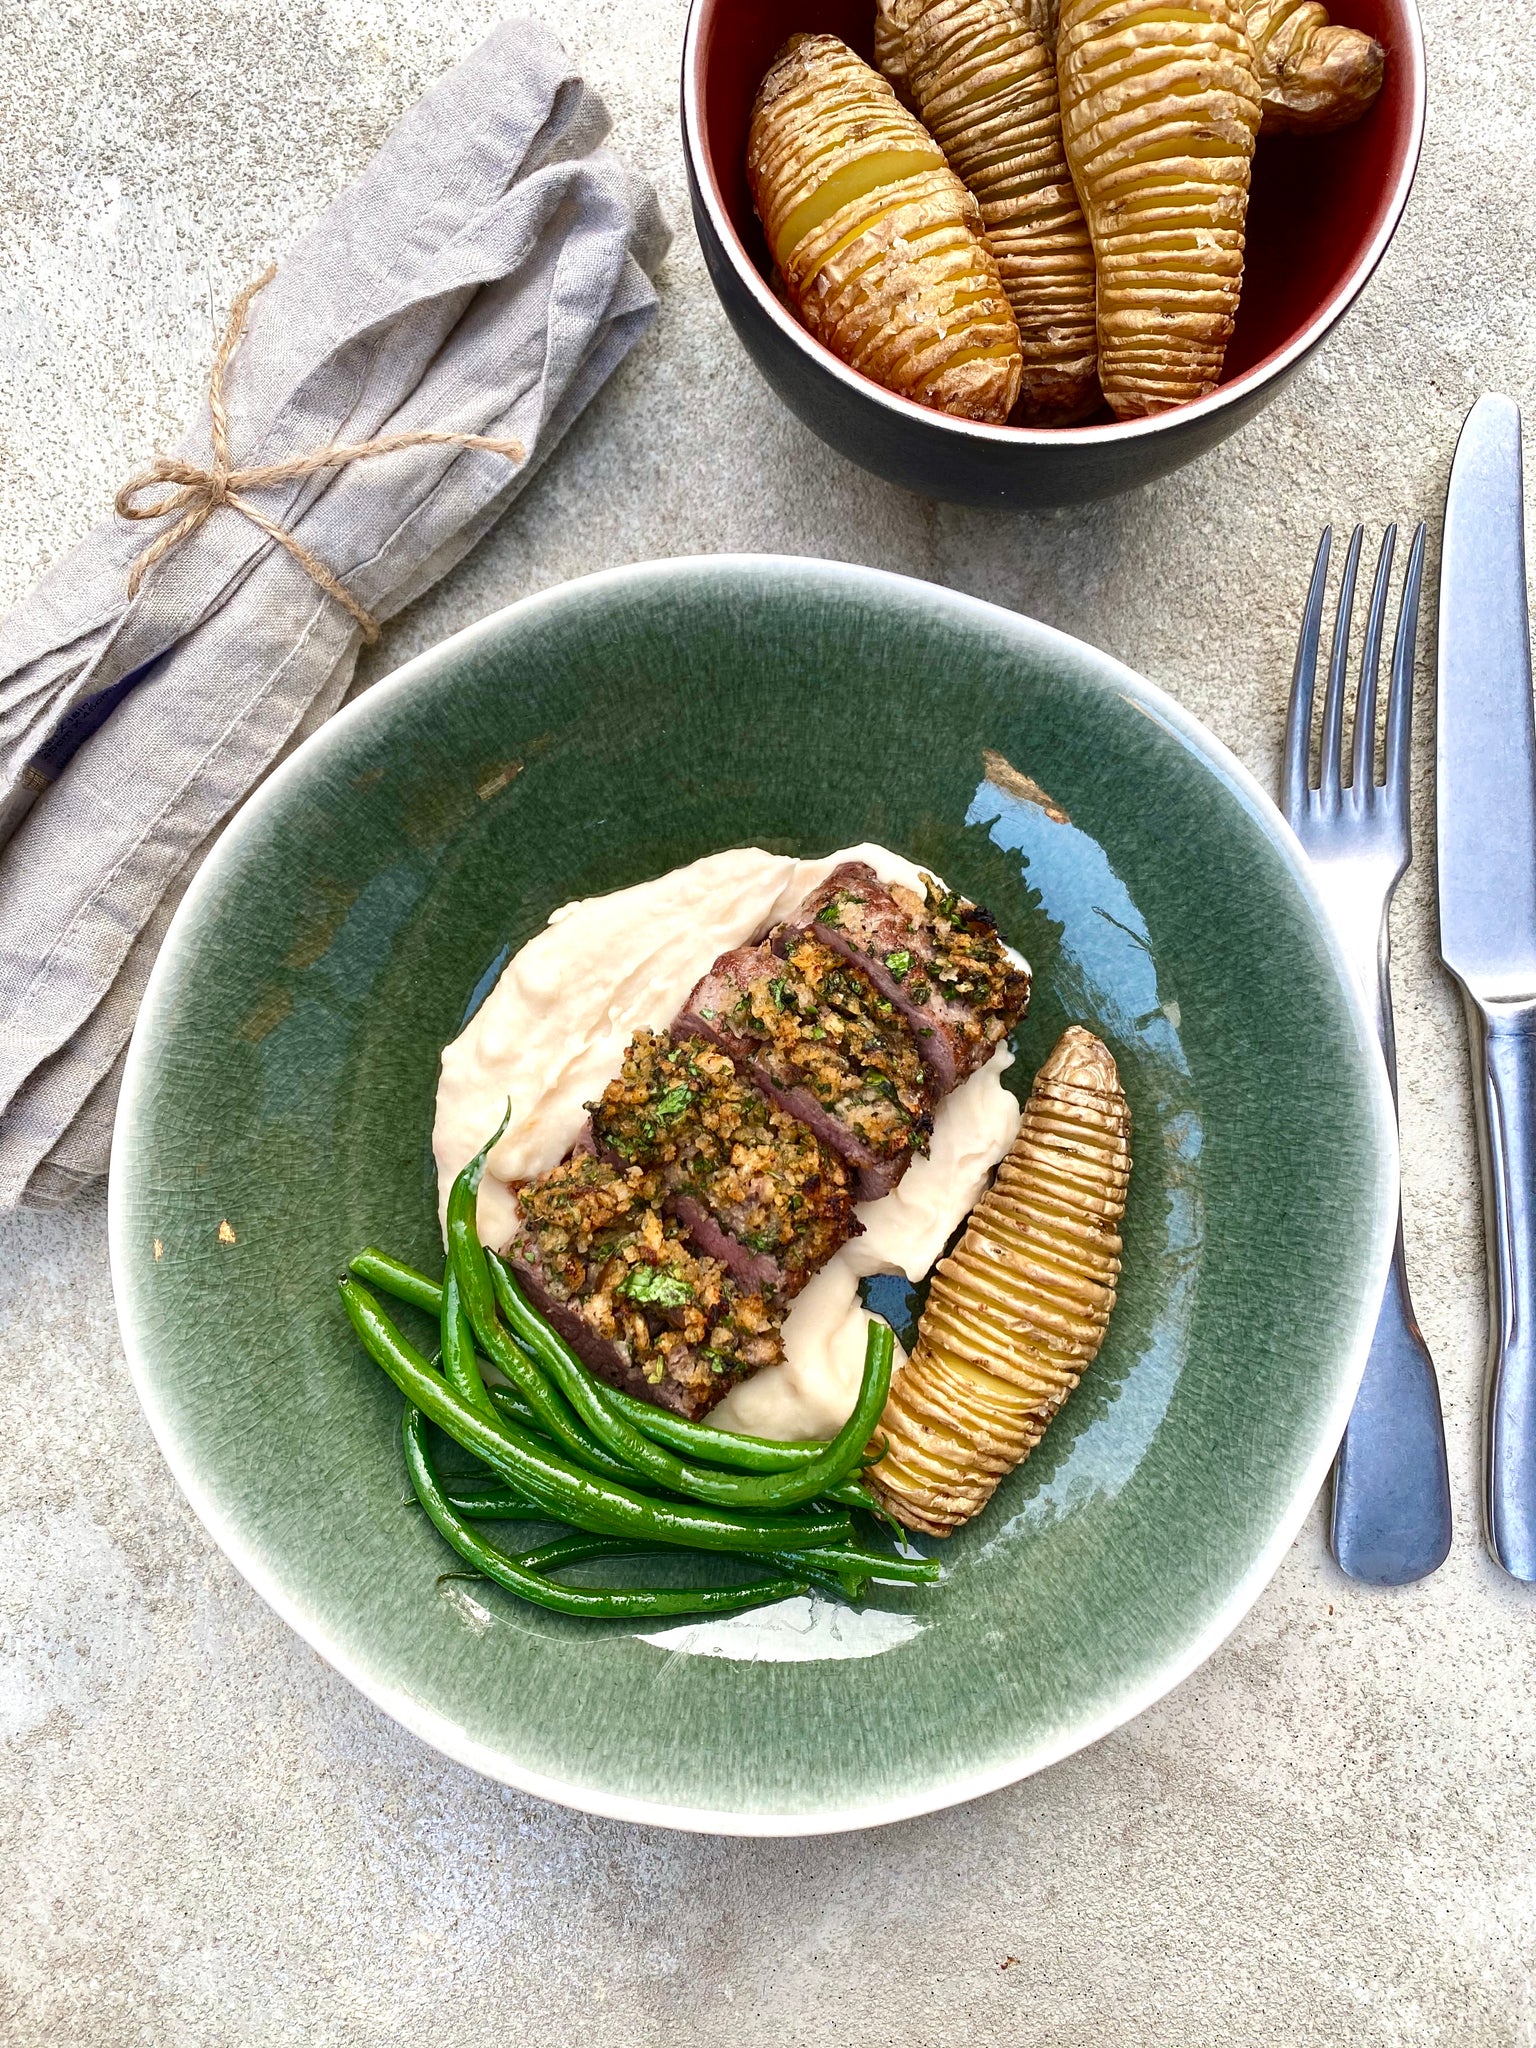 Herb-Crusted Cannons of Lamb with Butterbean Mash & Hasselback Potatoes Recipe